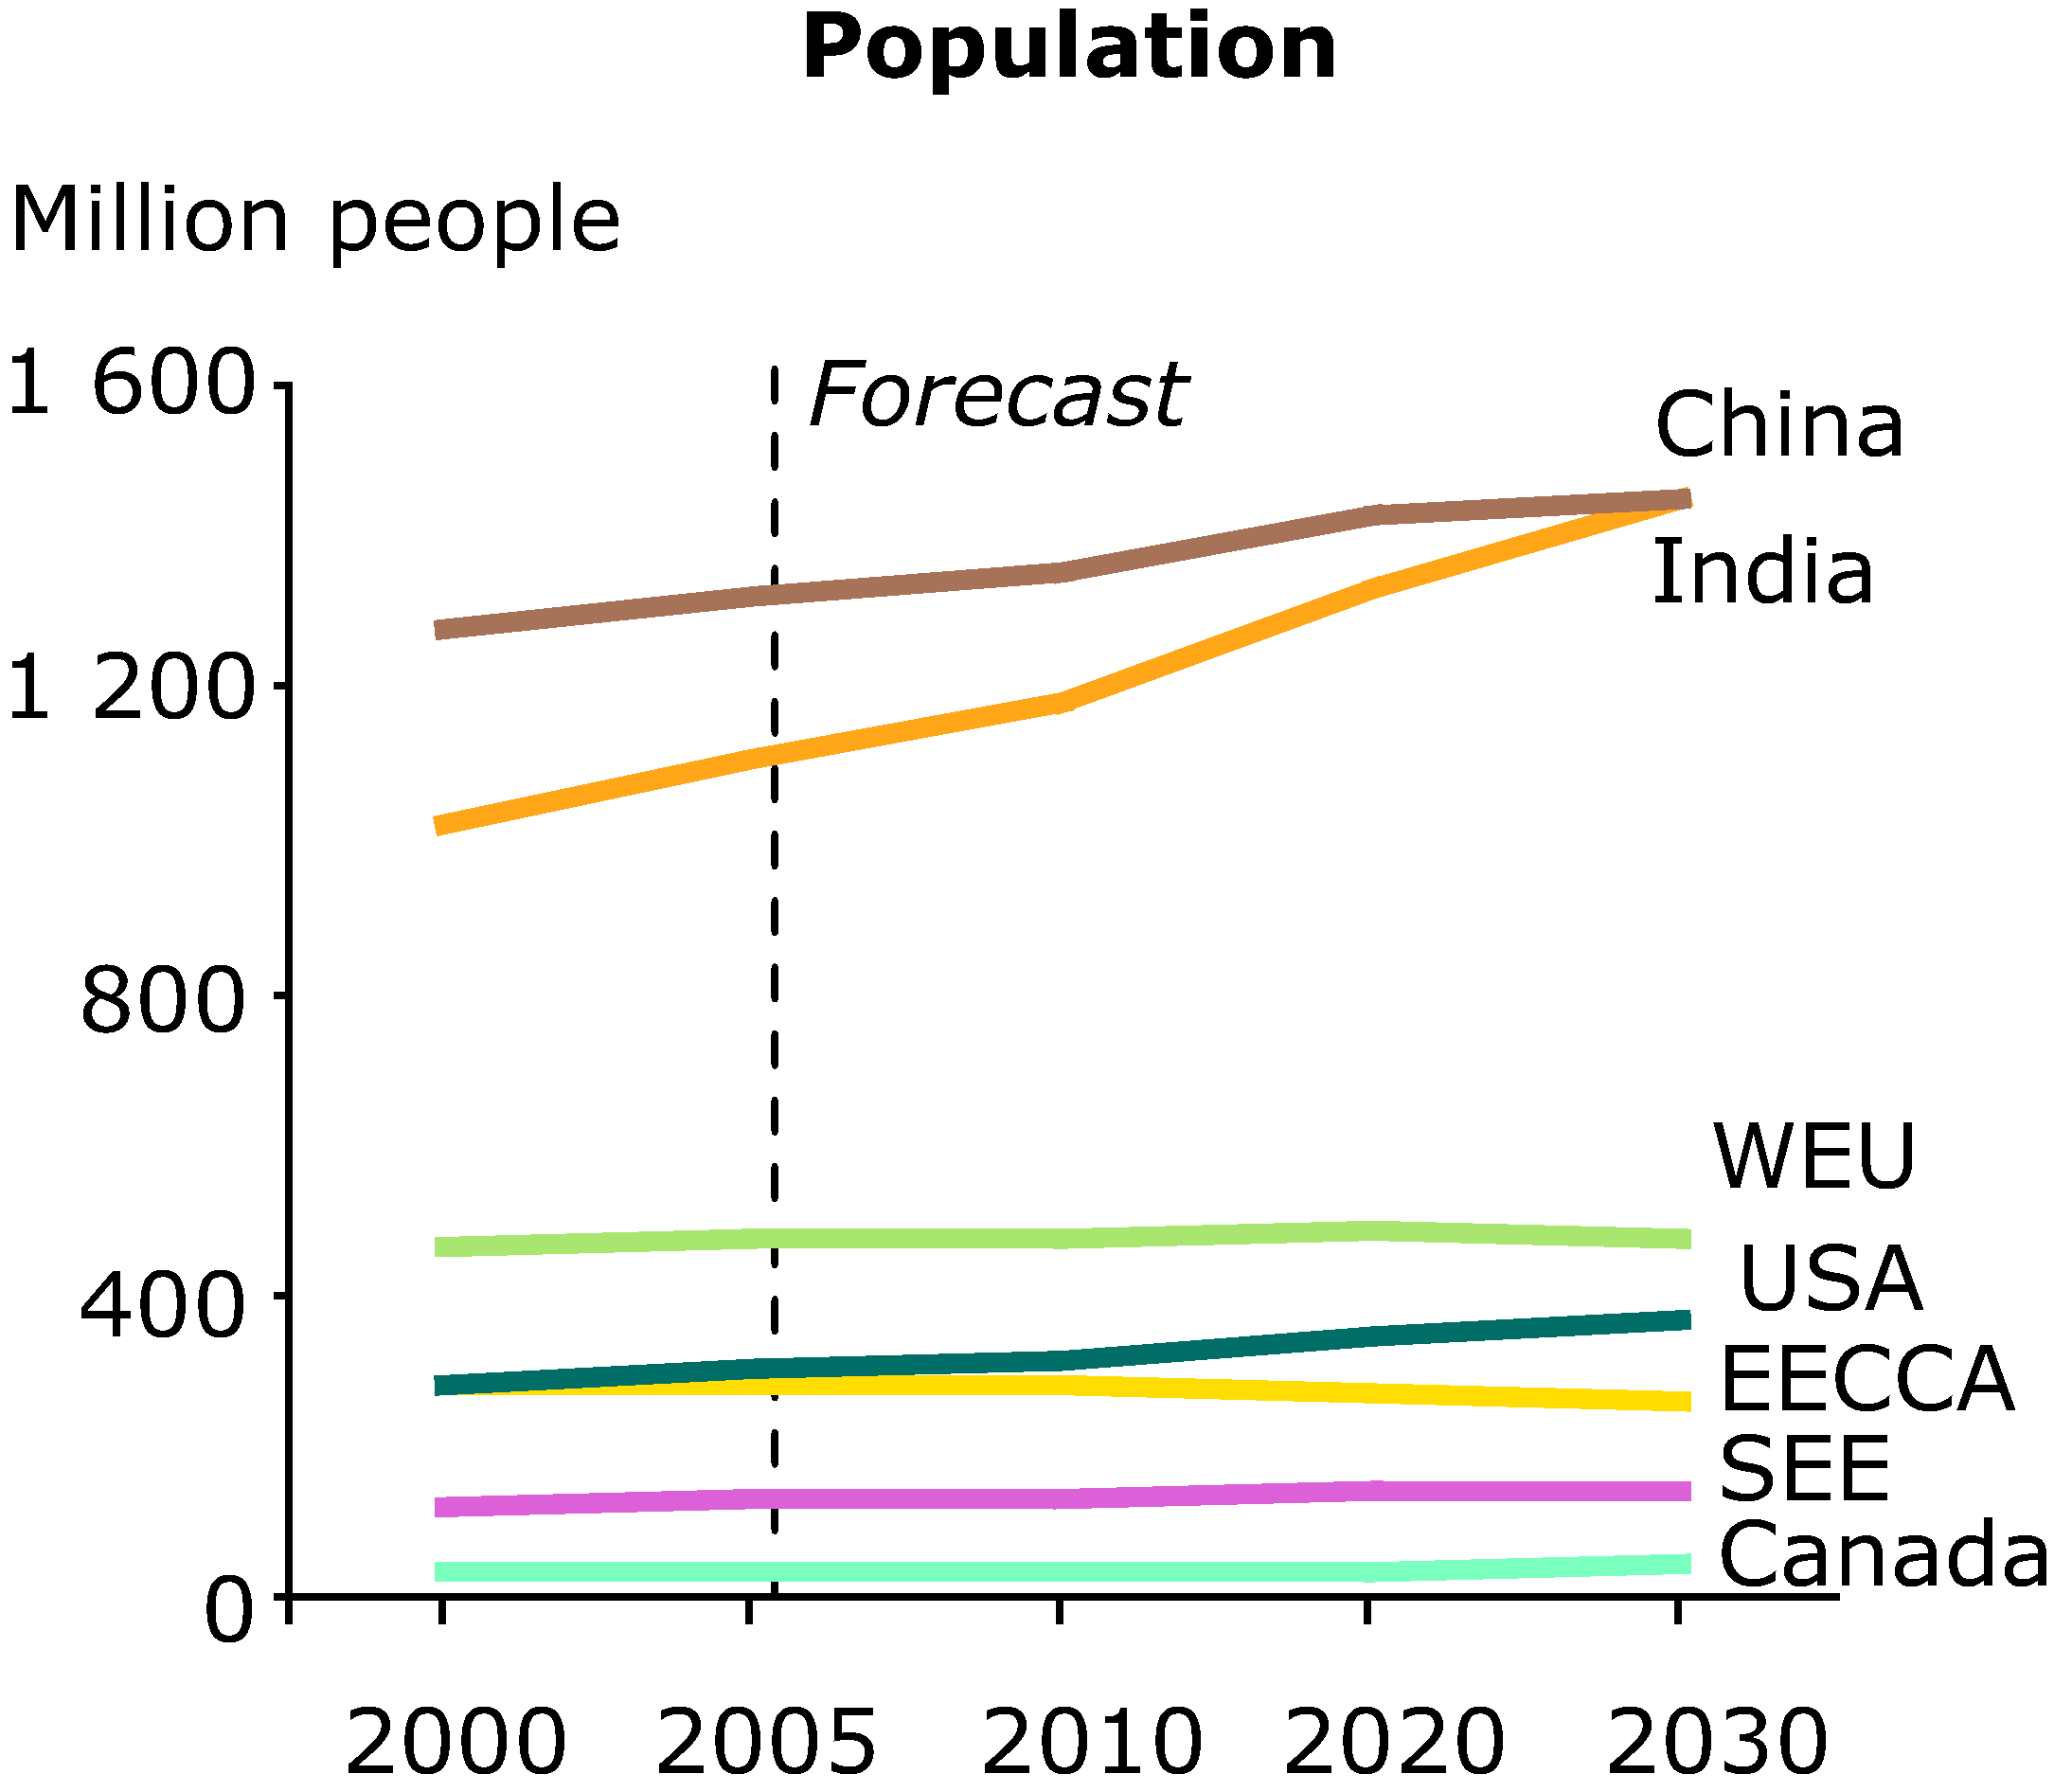 Projected population